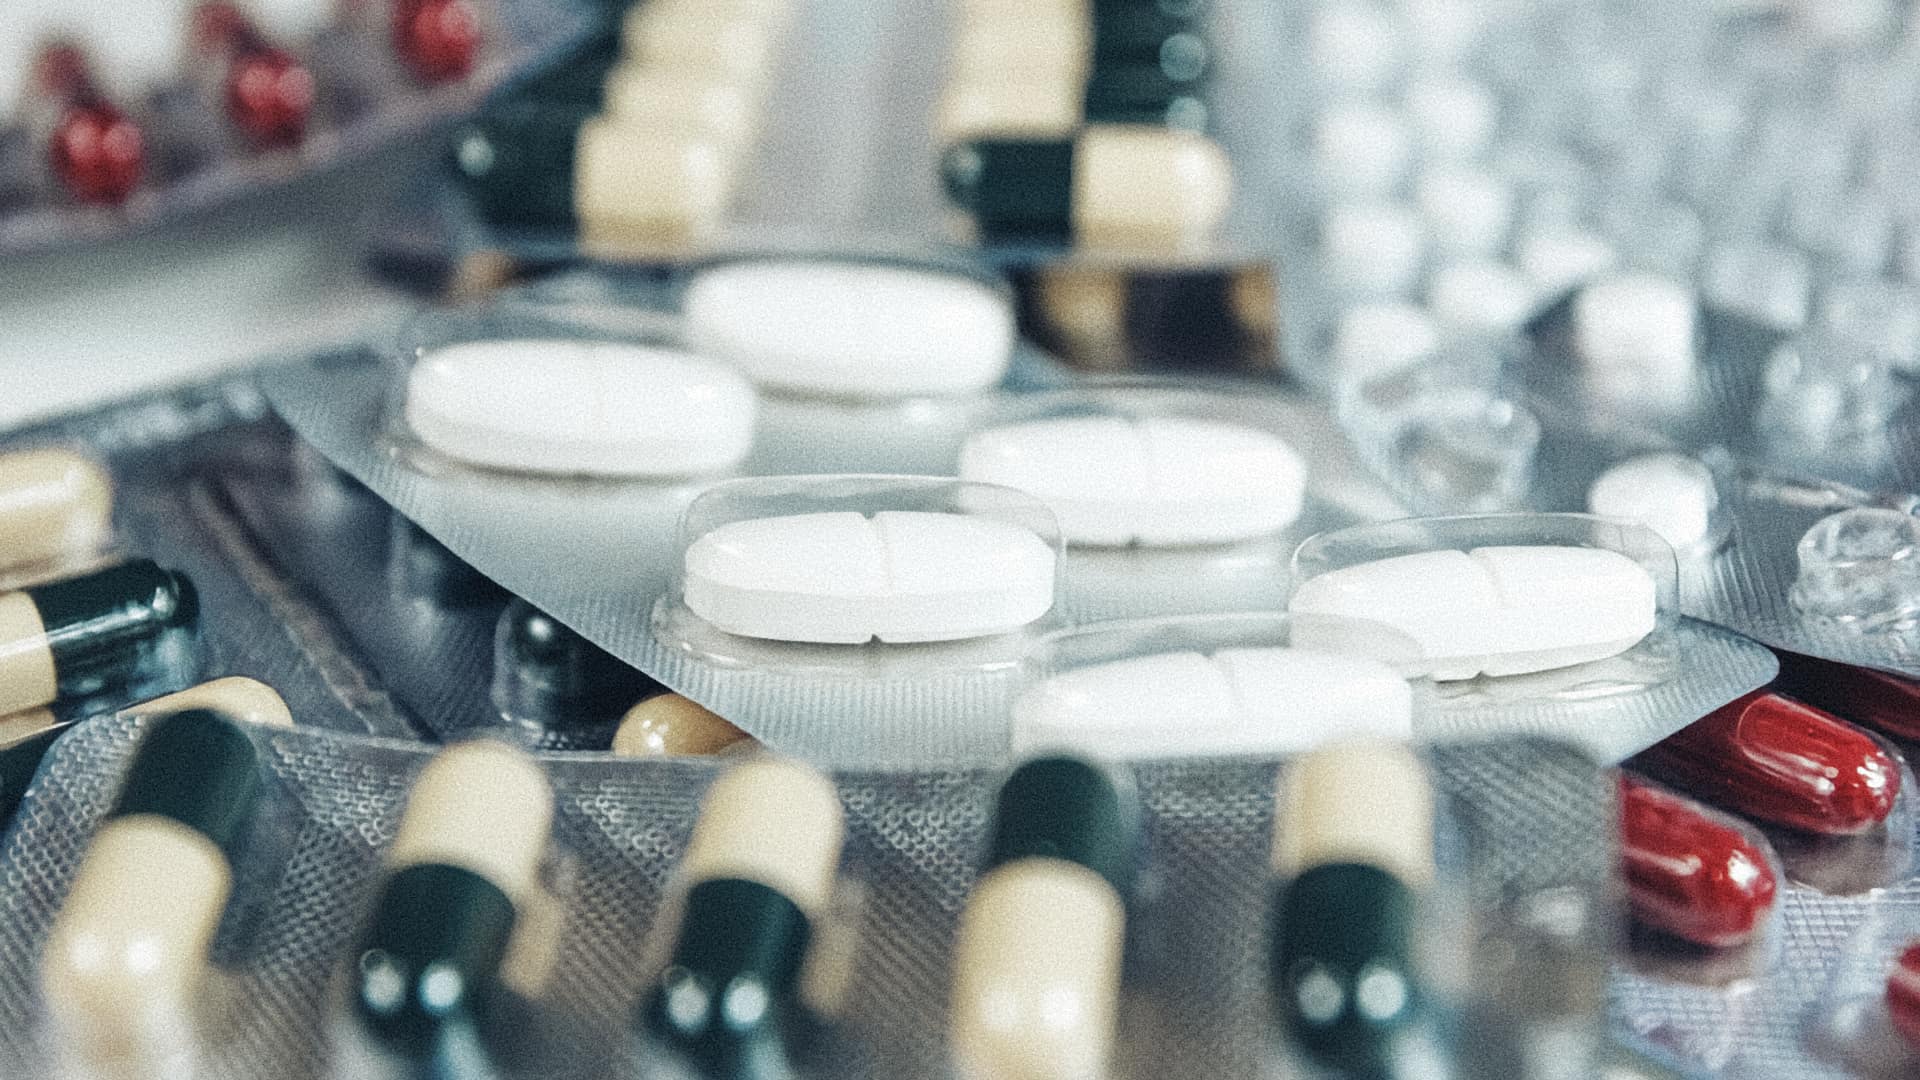 92% of medicines sold in Mexico are generic